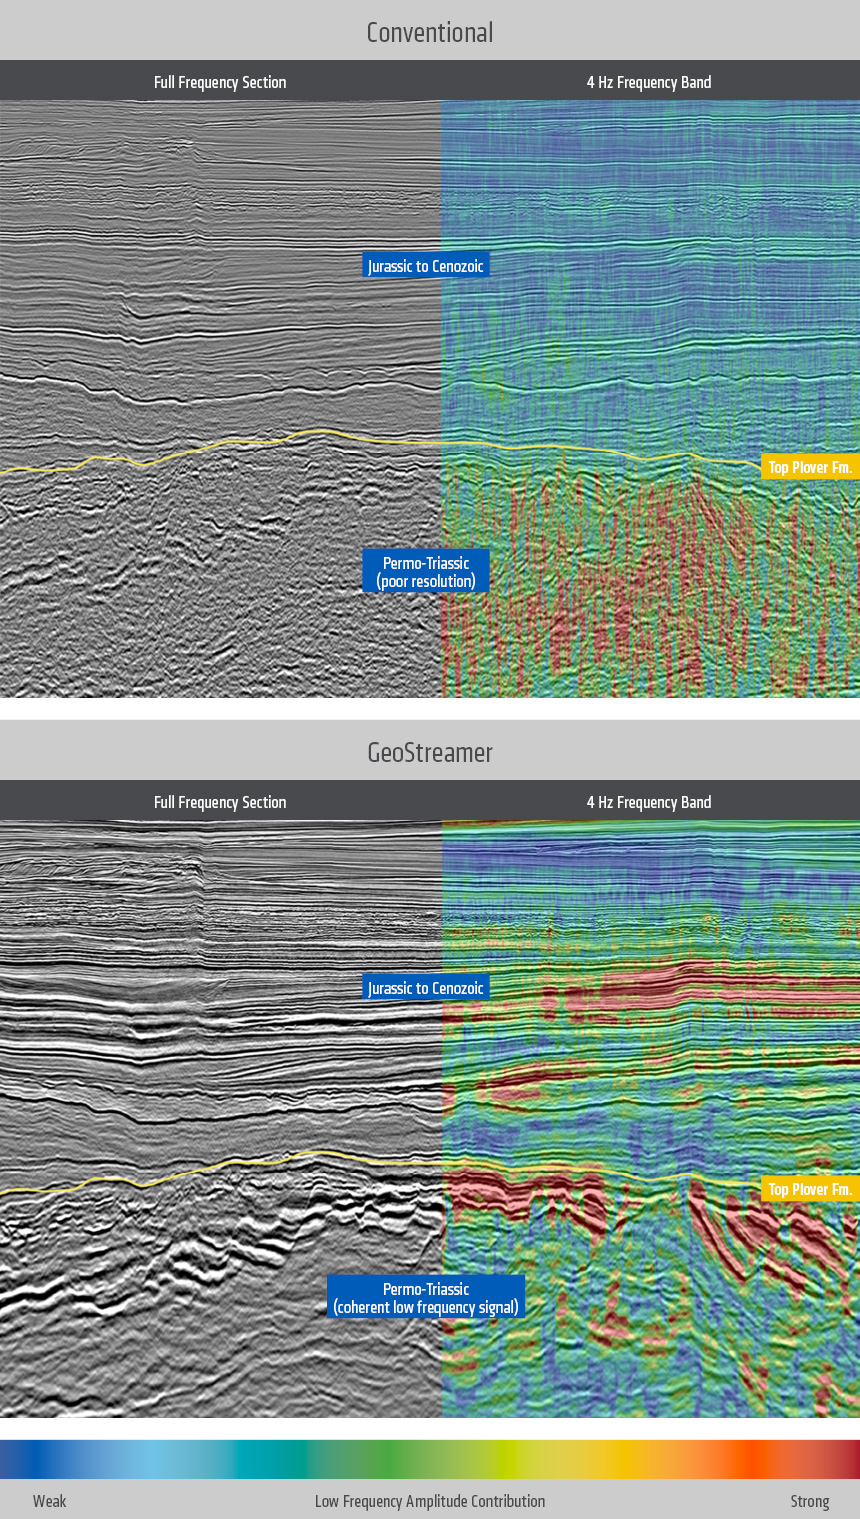 Comparison of conventional legacy (upper) and GeoStreamer (lower) seismic data in the Caswell MC3D survey location. The GeoStreamer data provides coherent low frequencies in the Permo-Triassic uncovering structures previously unresolved with conventional data.